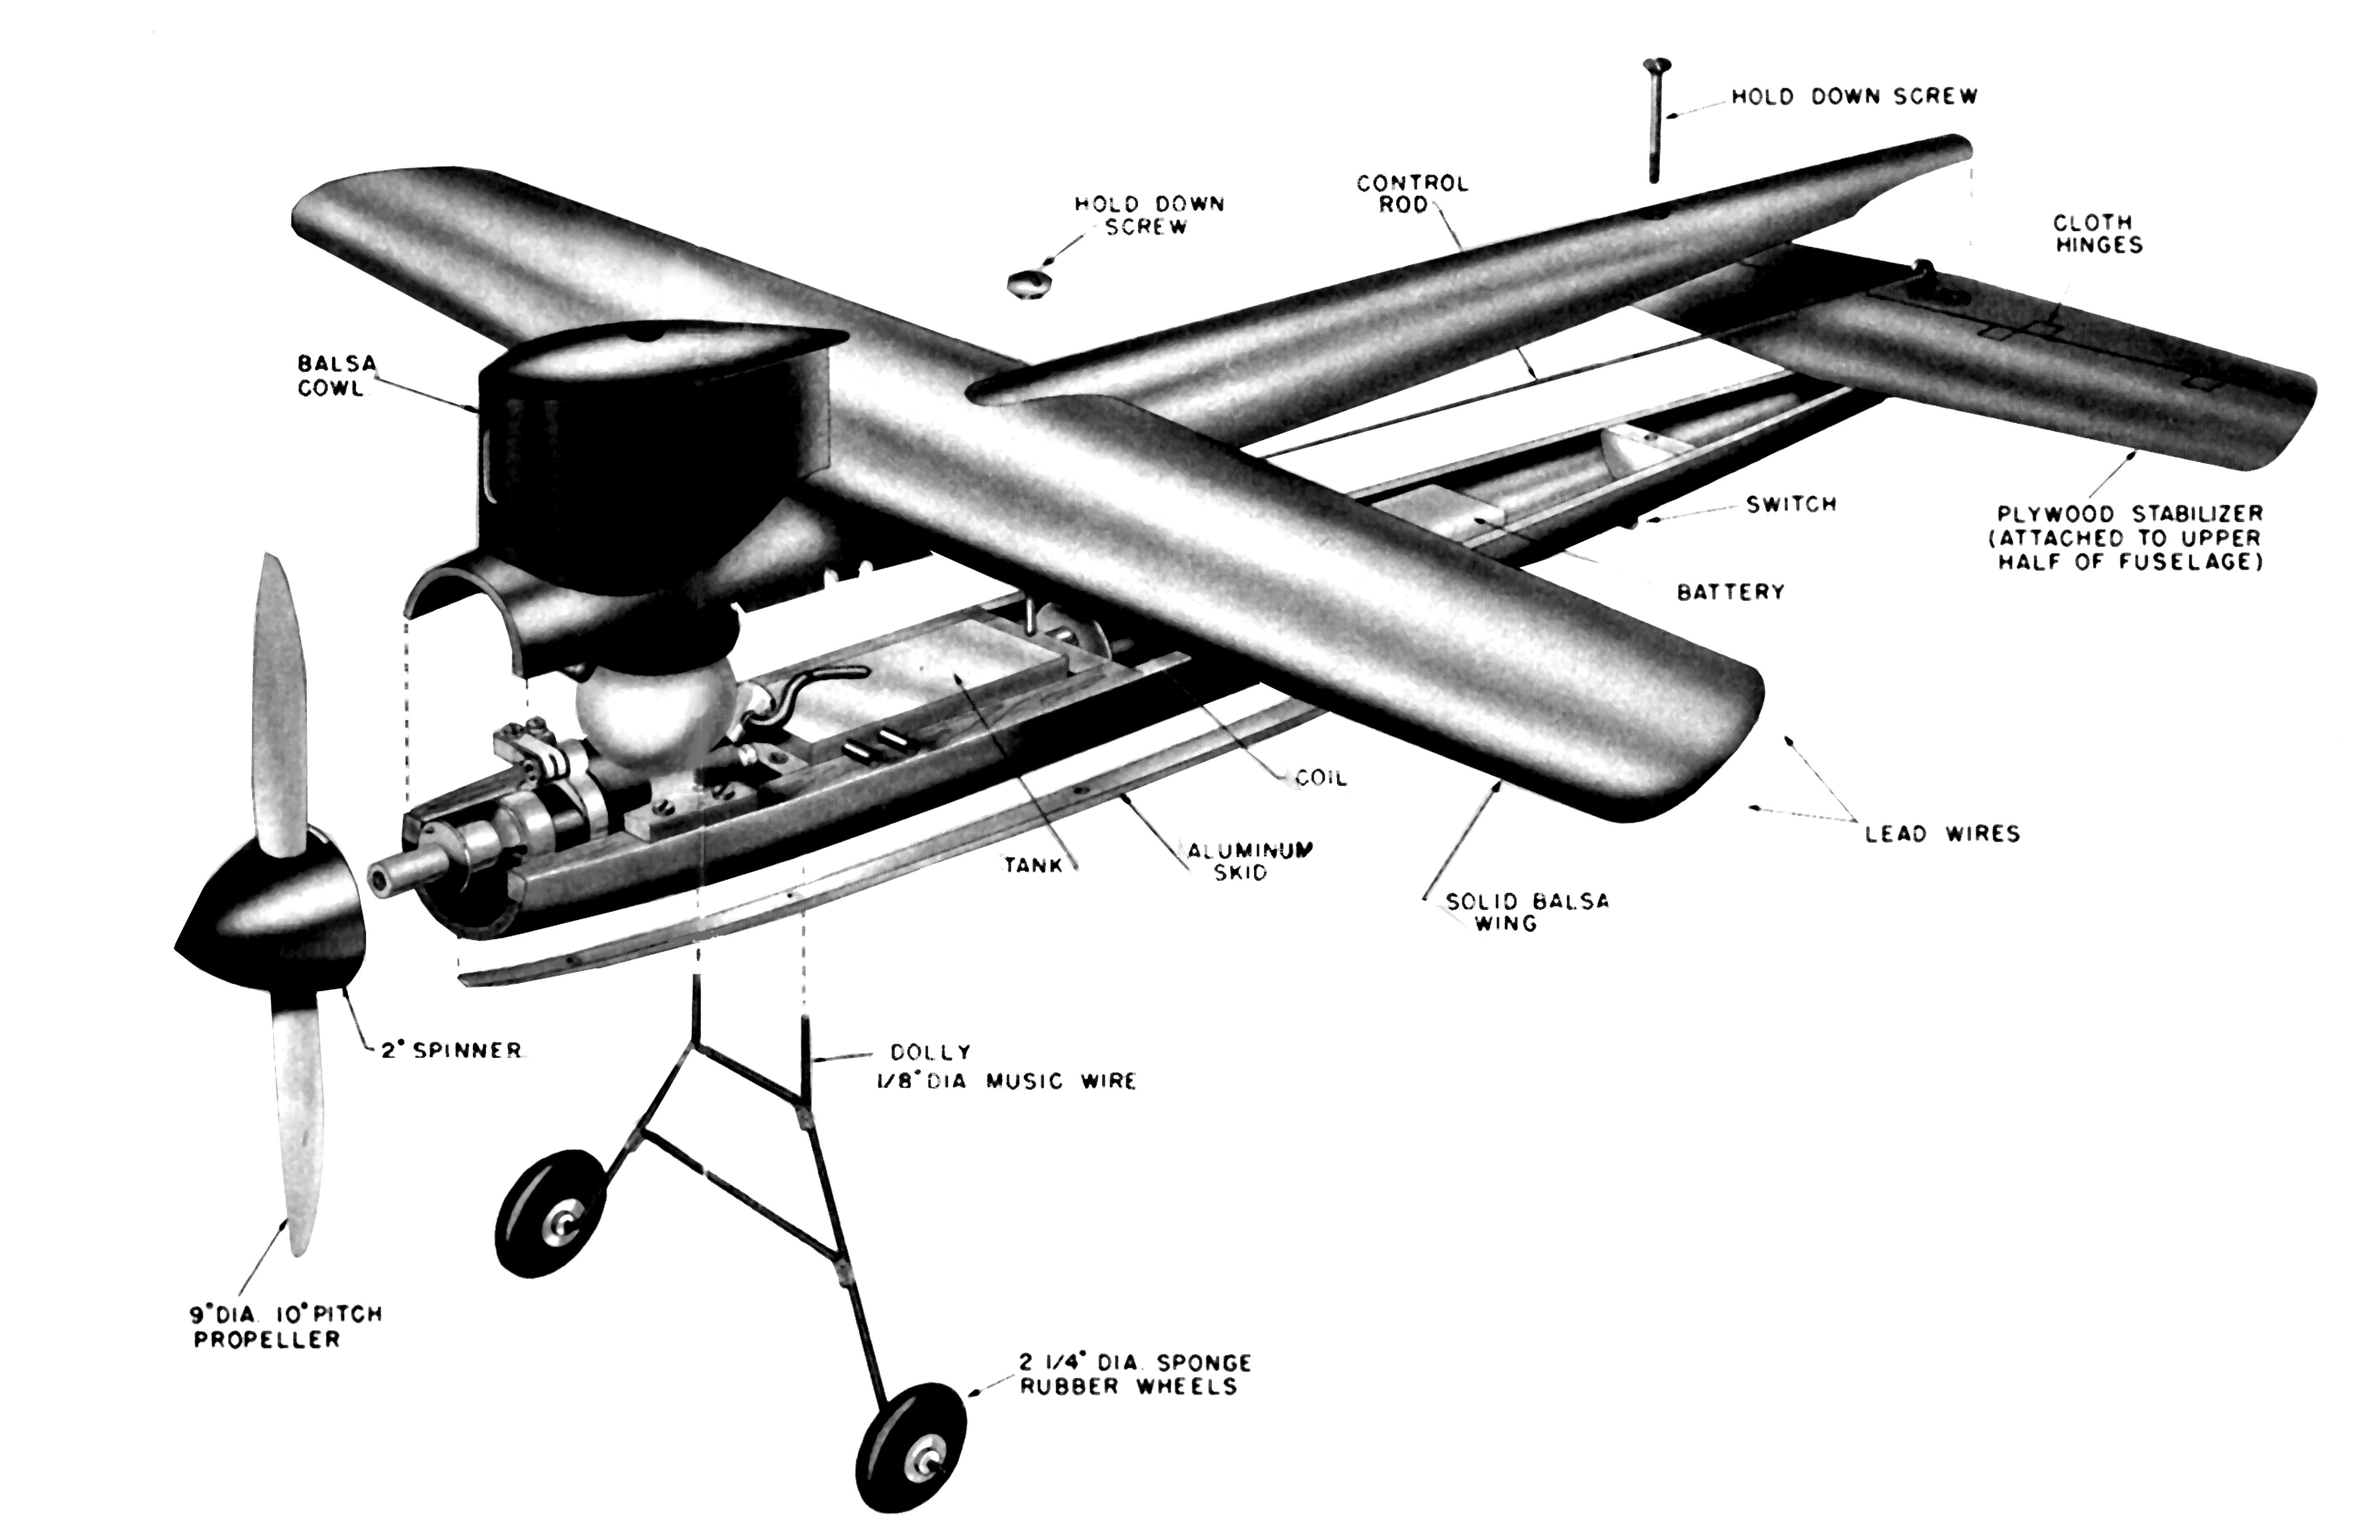 full size printed plan control line speed  form late 50s to 60s  "spamp special" wingspan 22”  engine .60 - .65